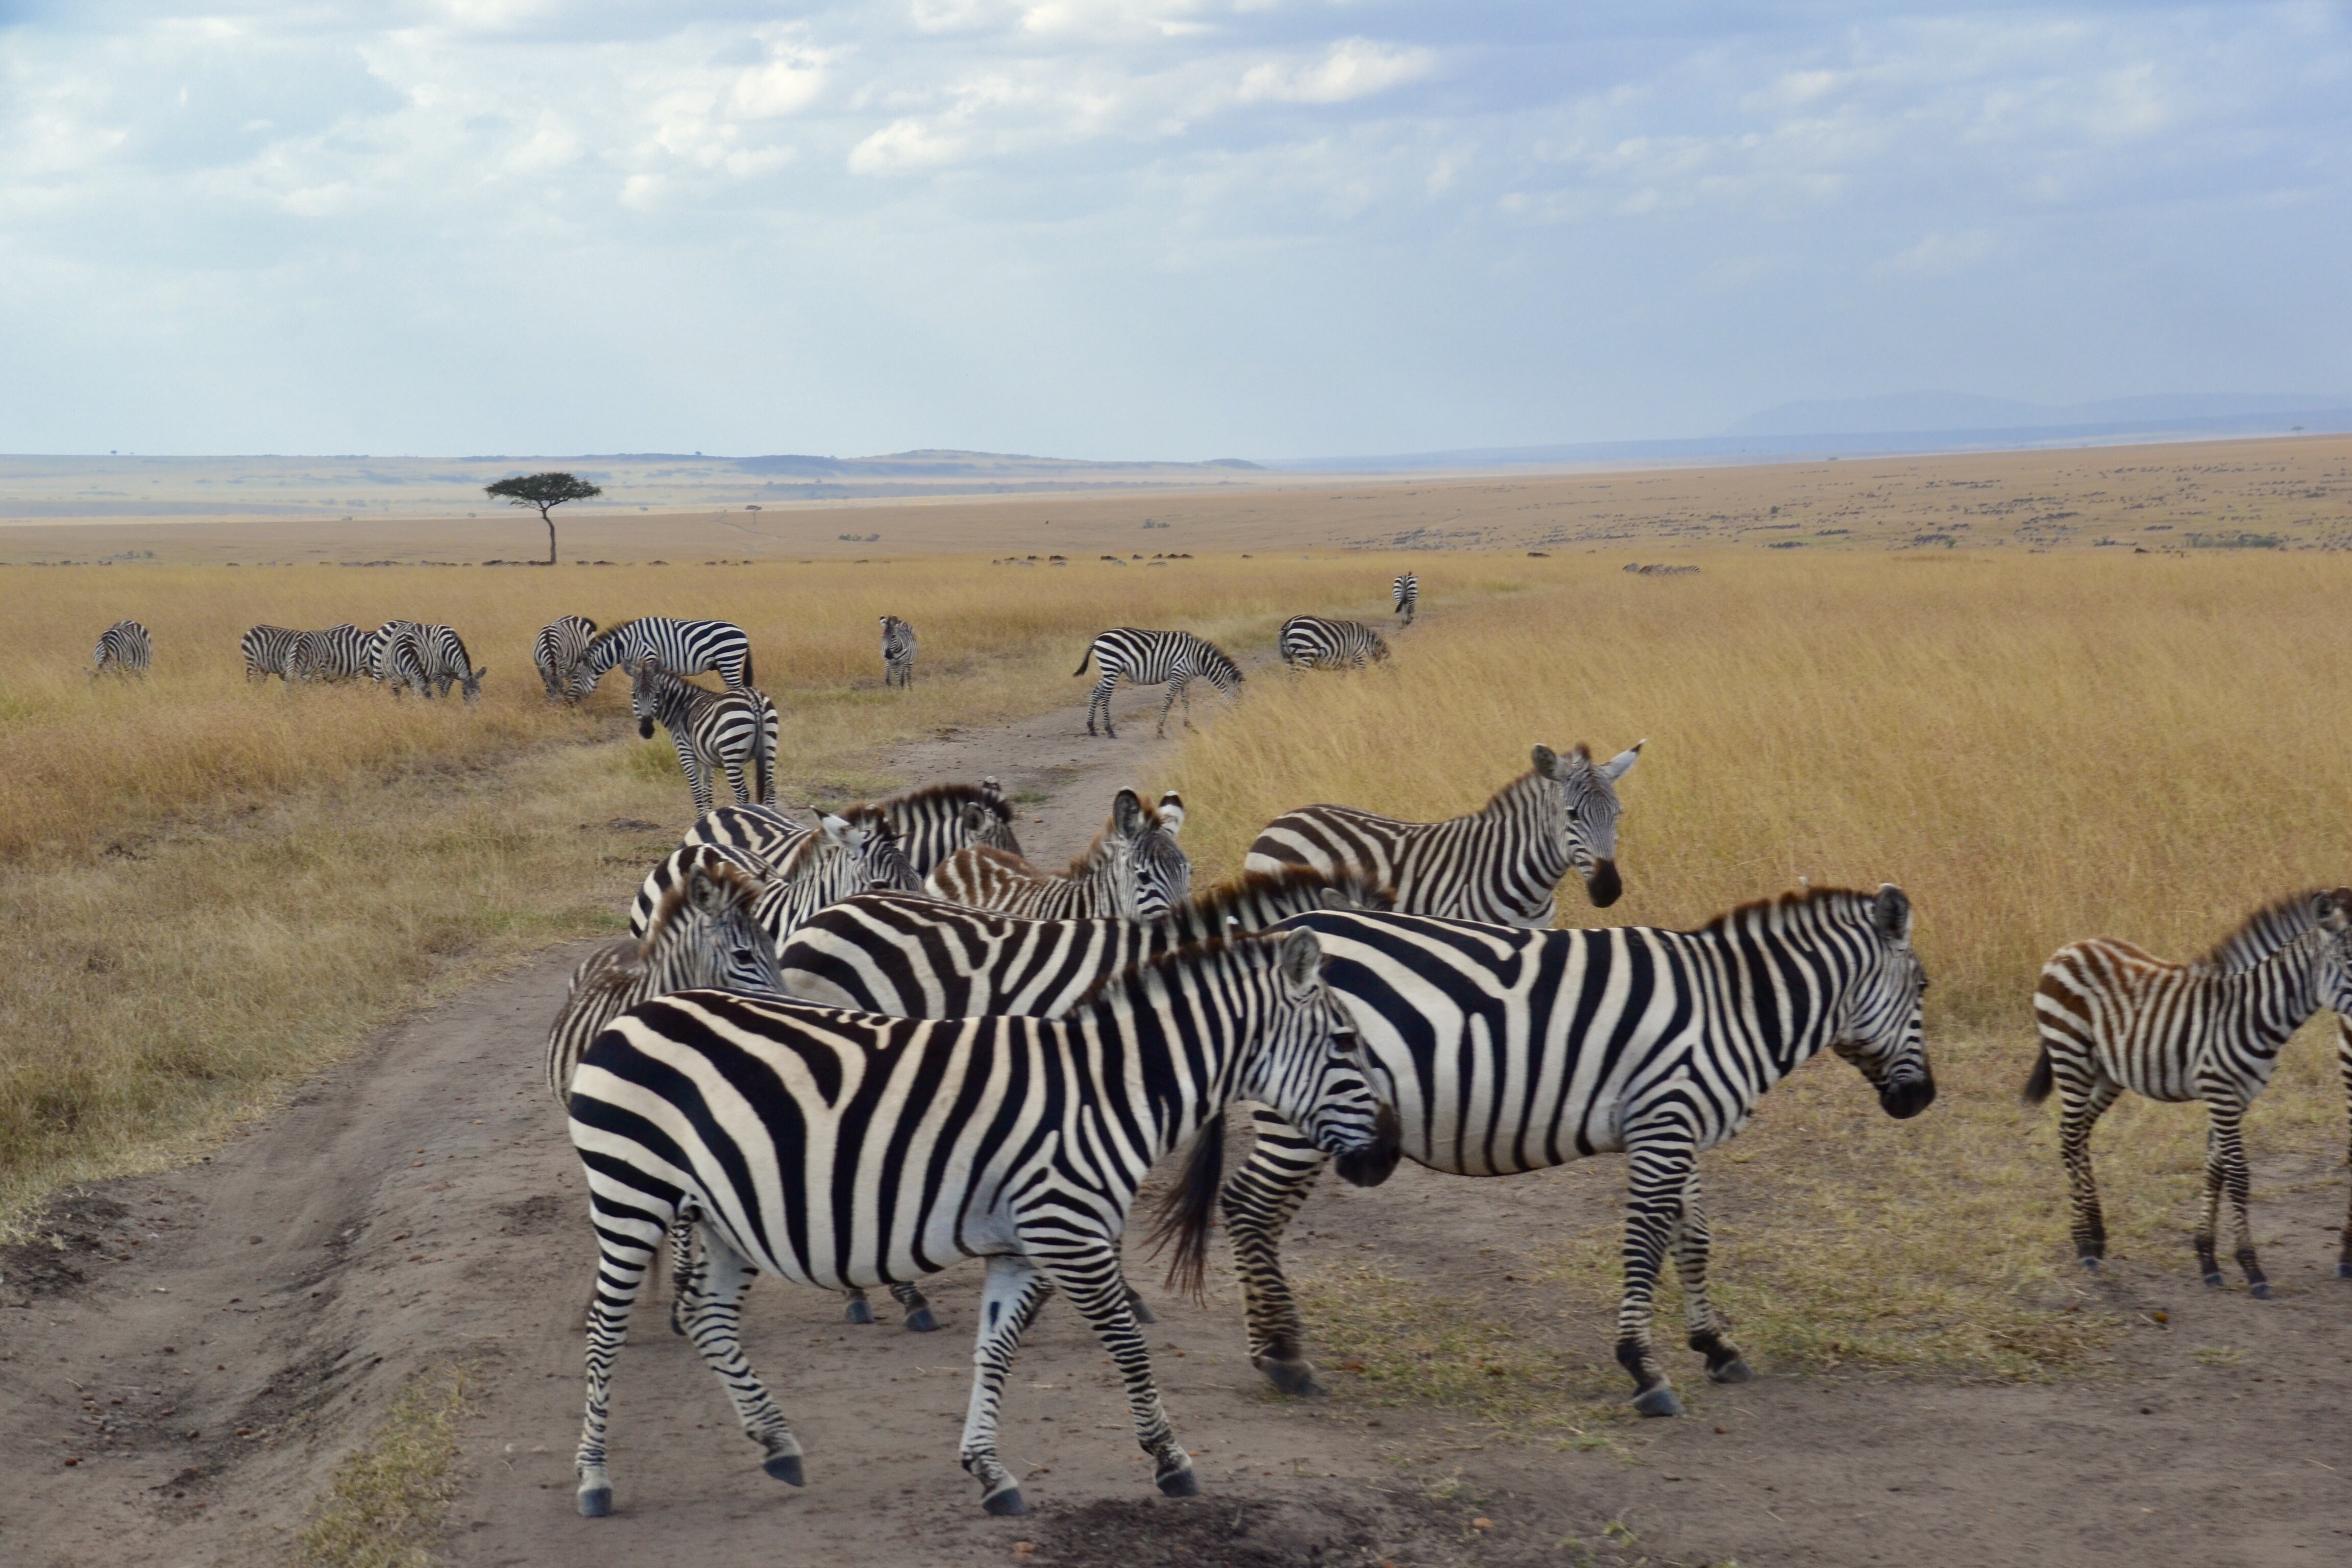 a group of zebras walking on a dirt road